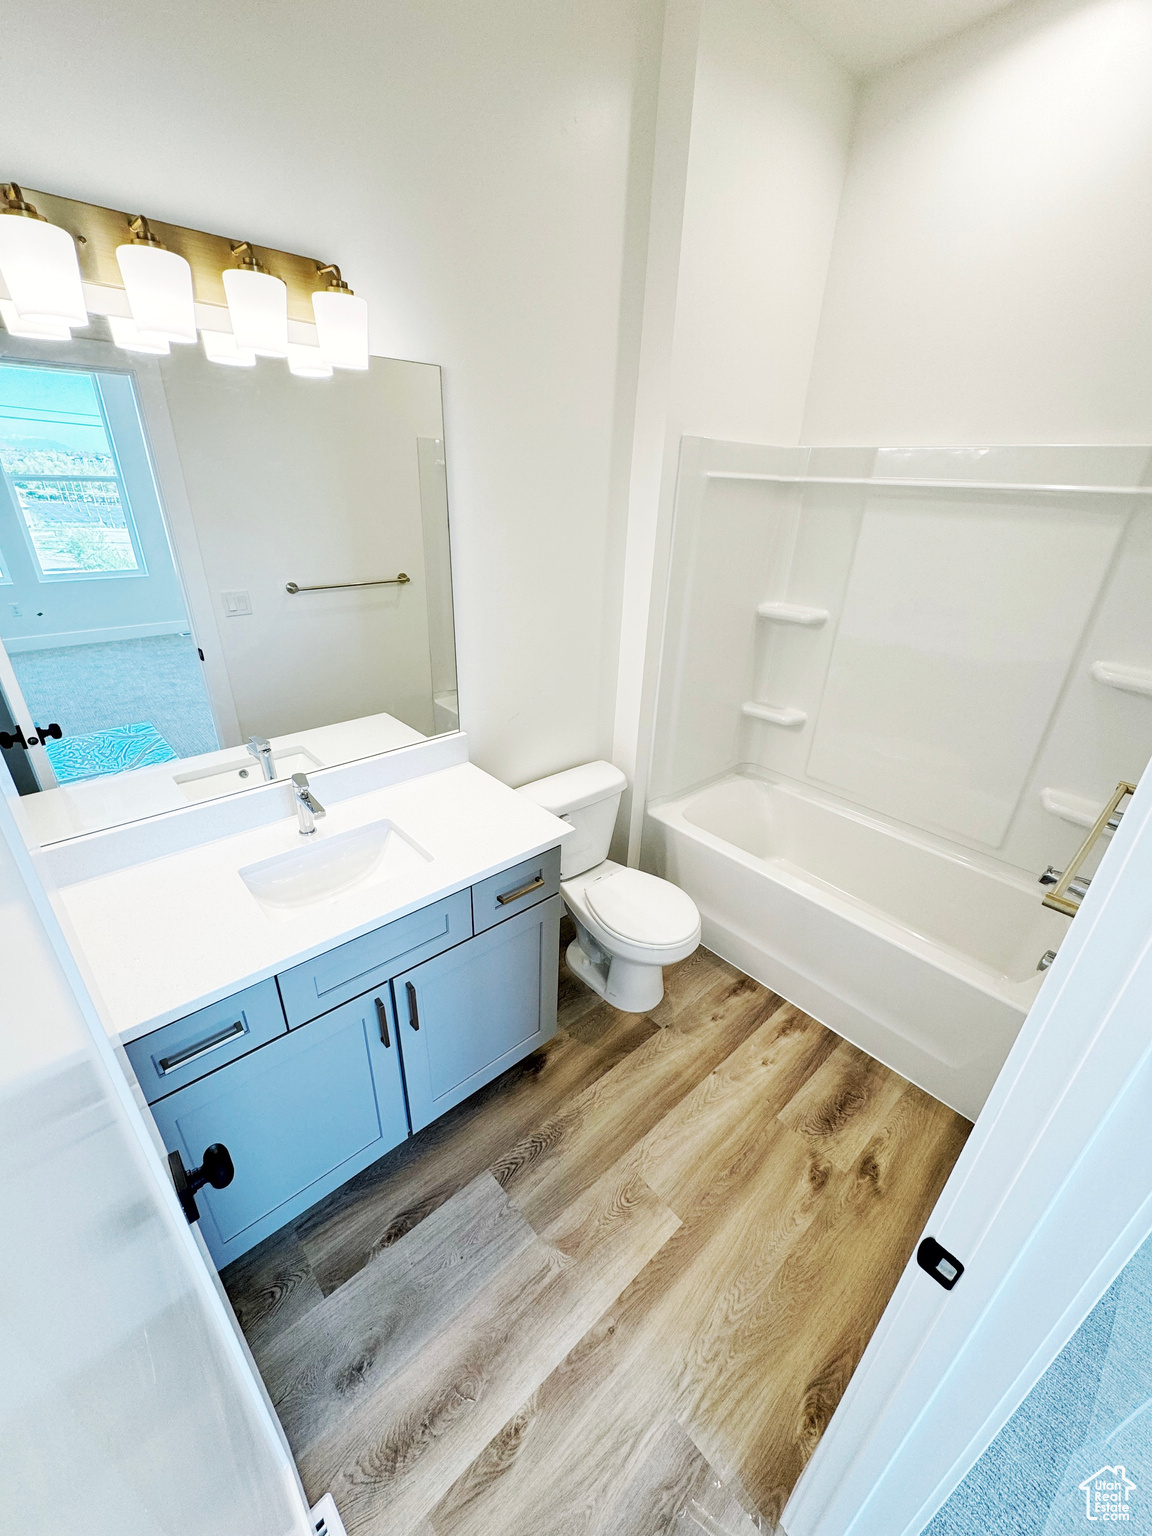 Full bathroom with LVP flooring, vanity, toilet, and shower / tub combination